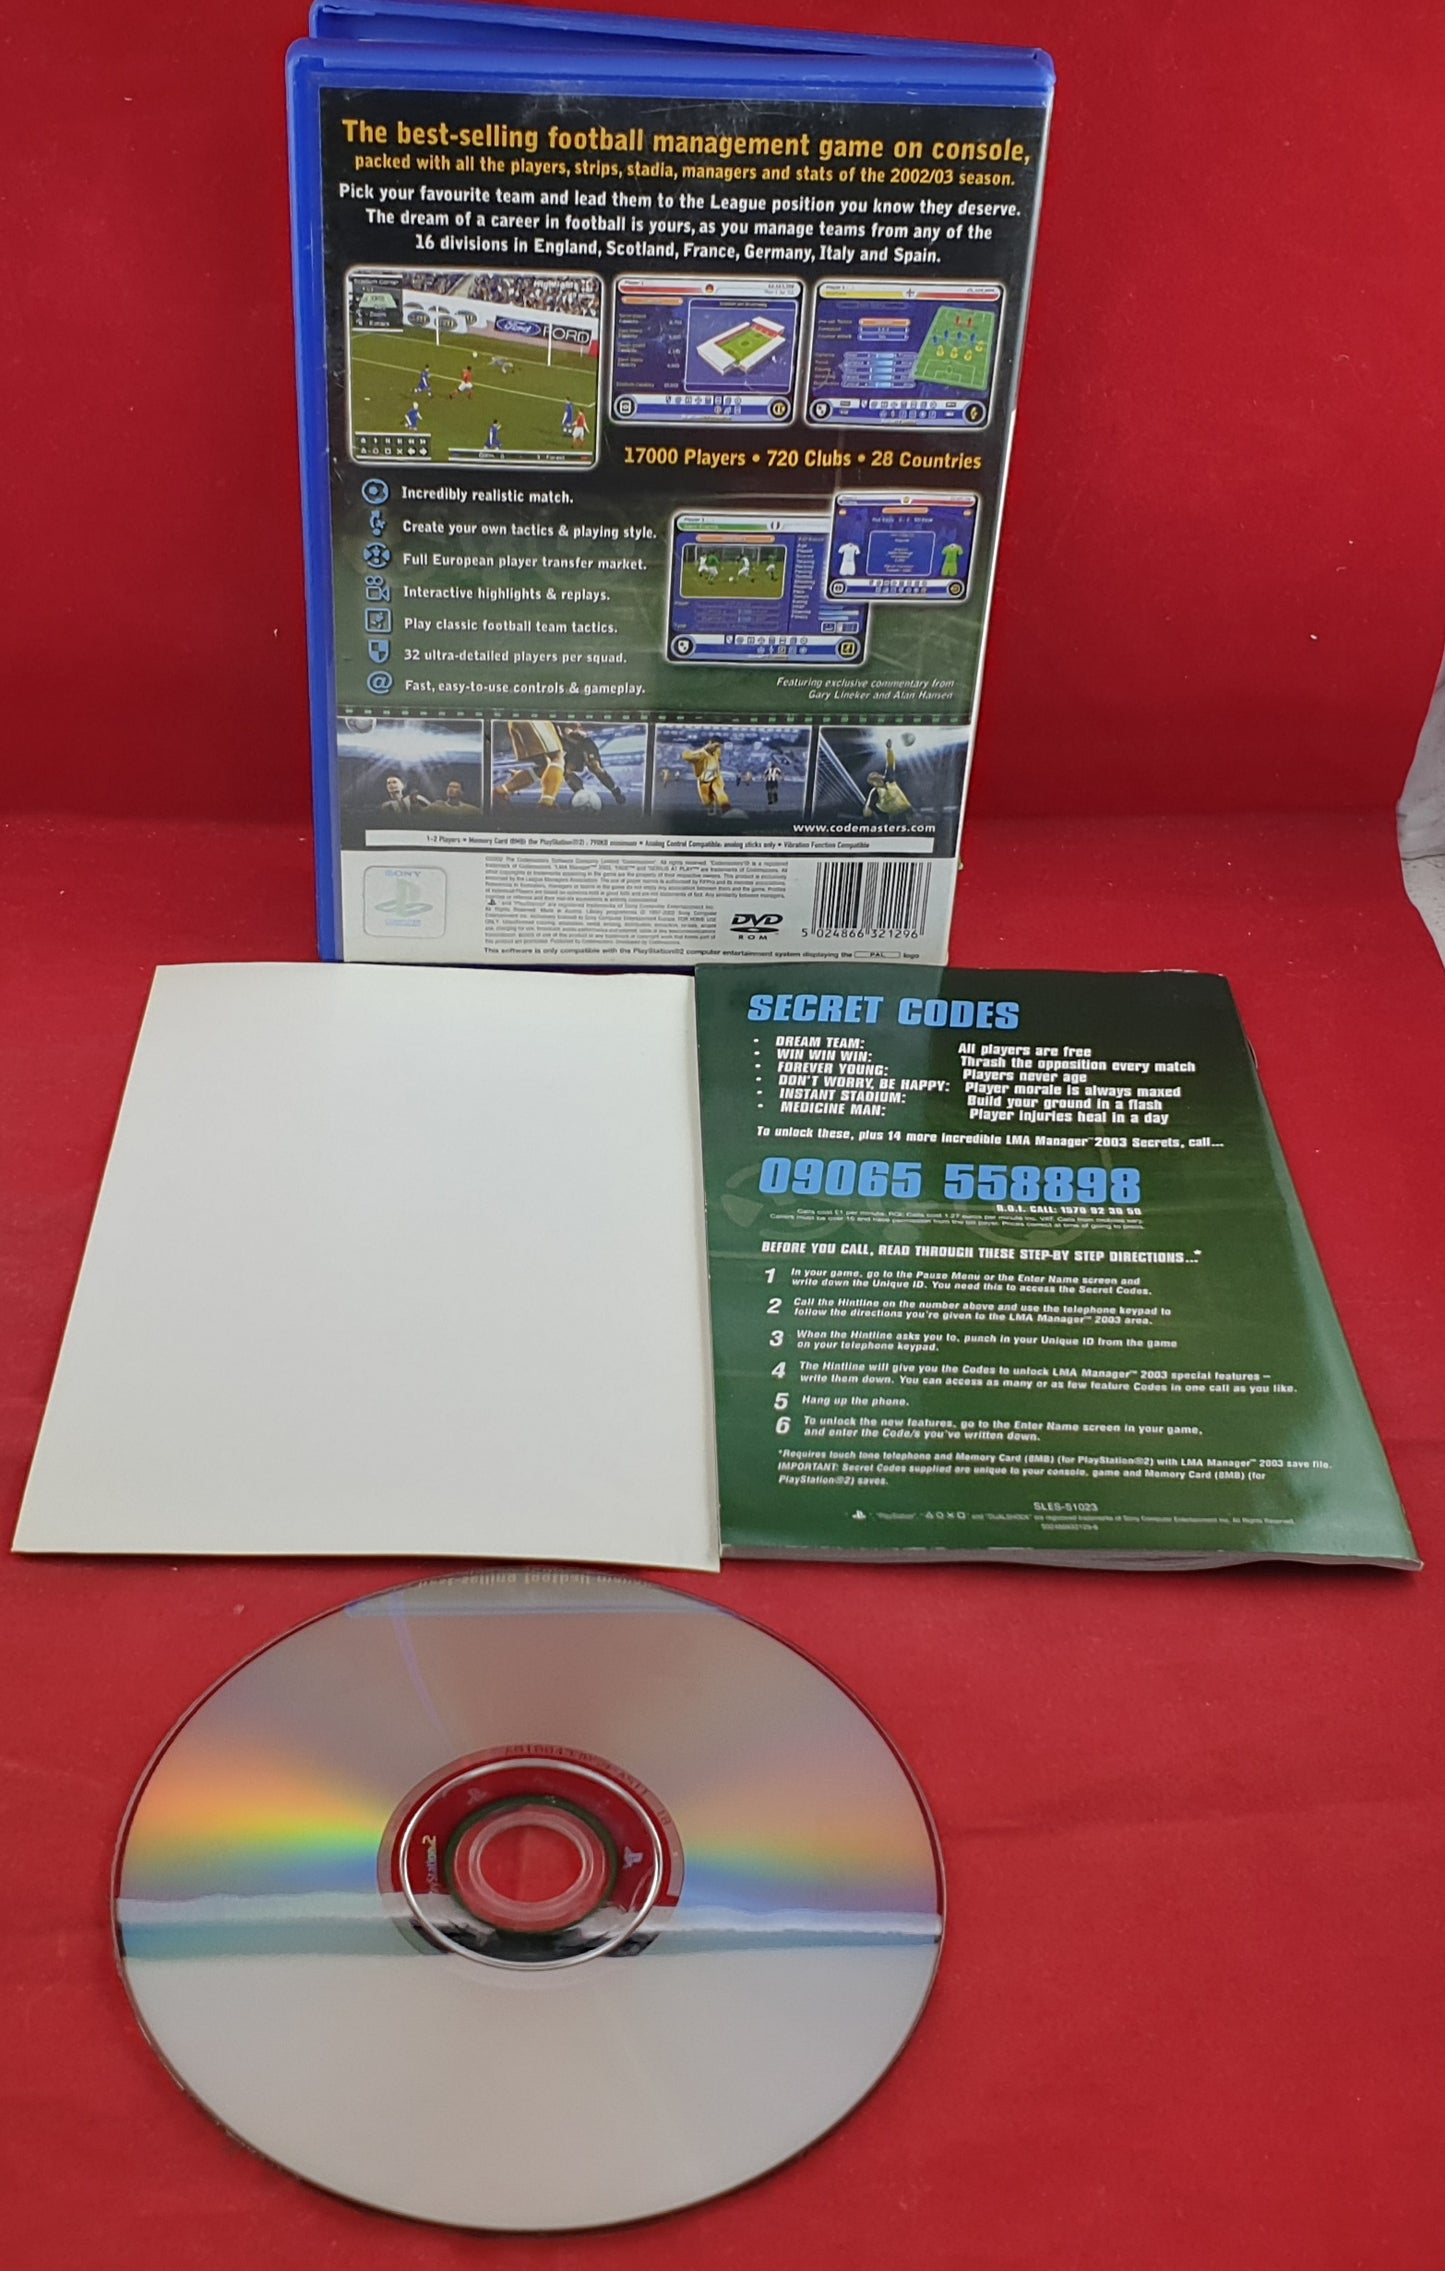 LMA Manager 2003 Sony Playstation 2 (PS2) Game